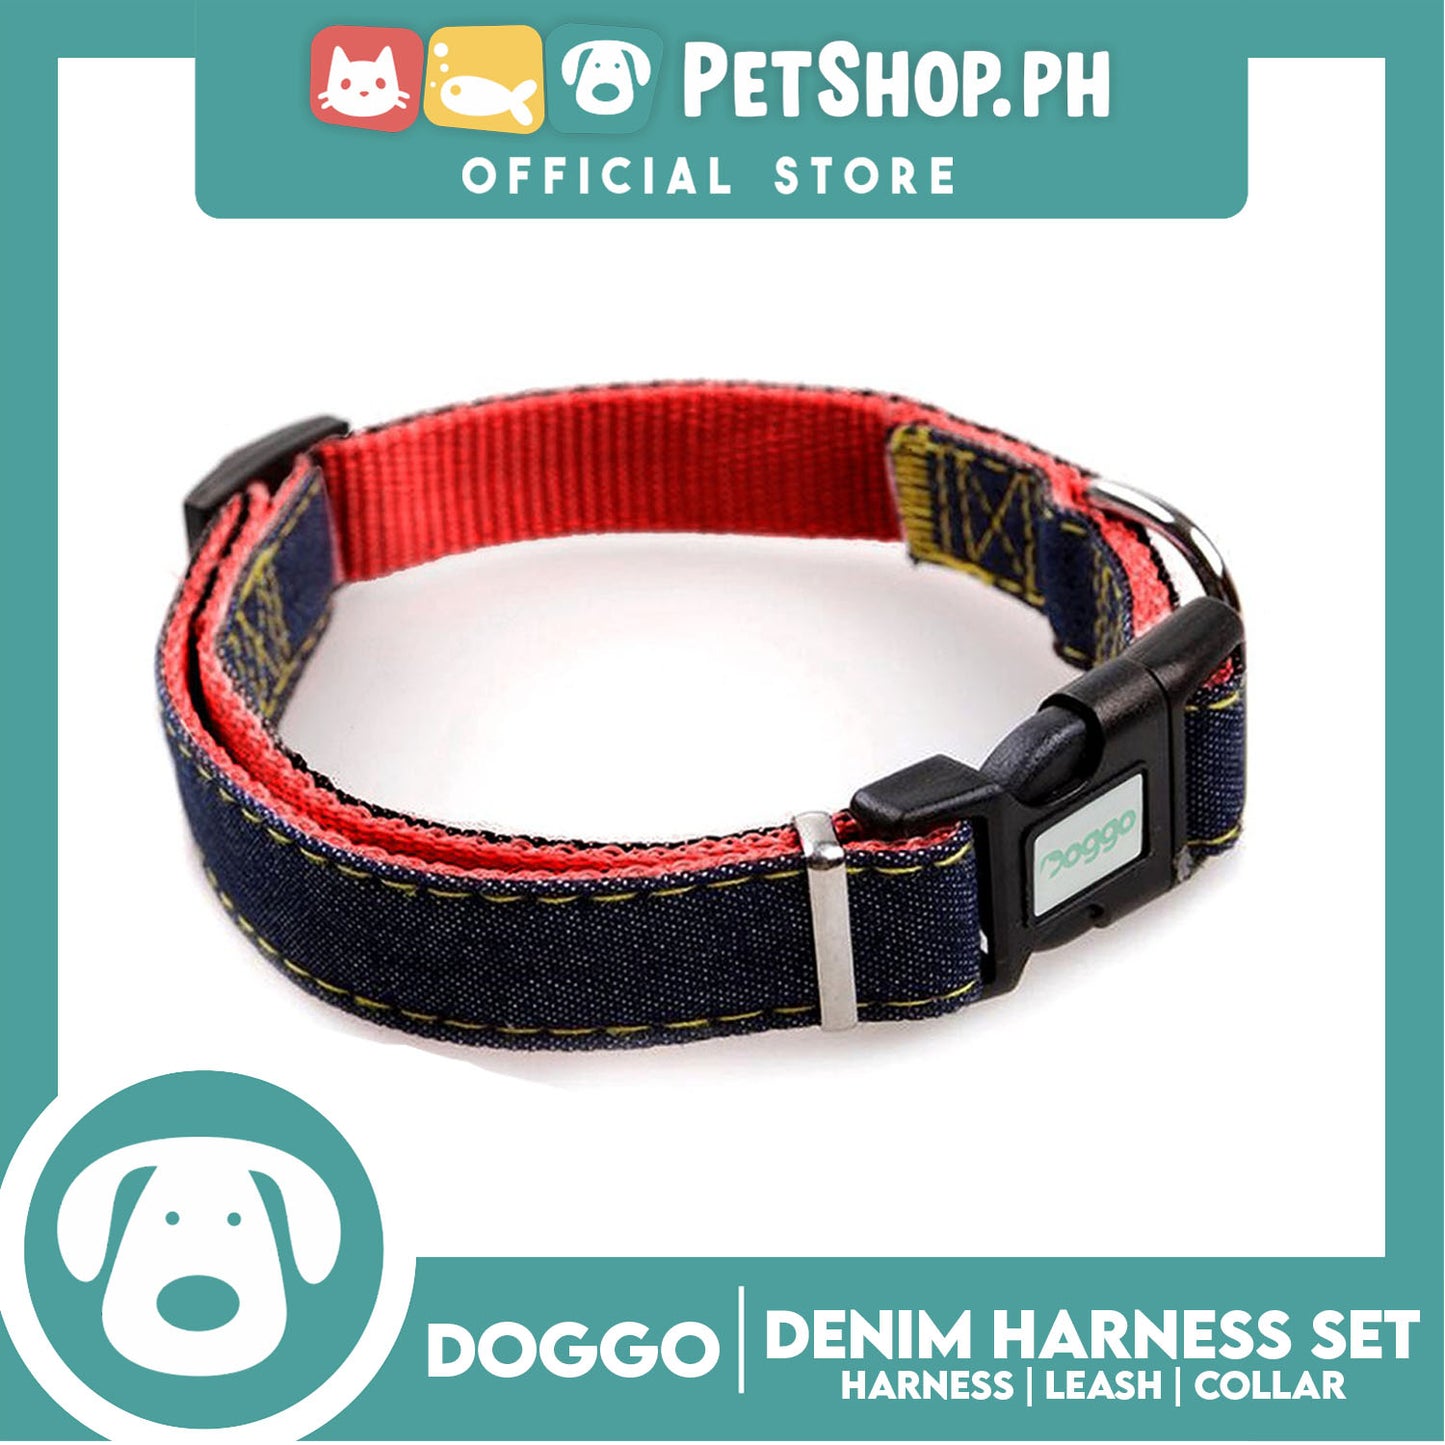 Doggo Strong Harness Set Denim Design Small (Red) Harness, Leash and Collar for Your Dog